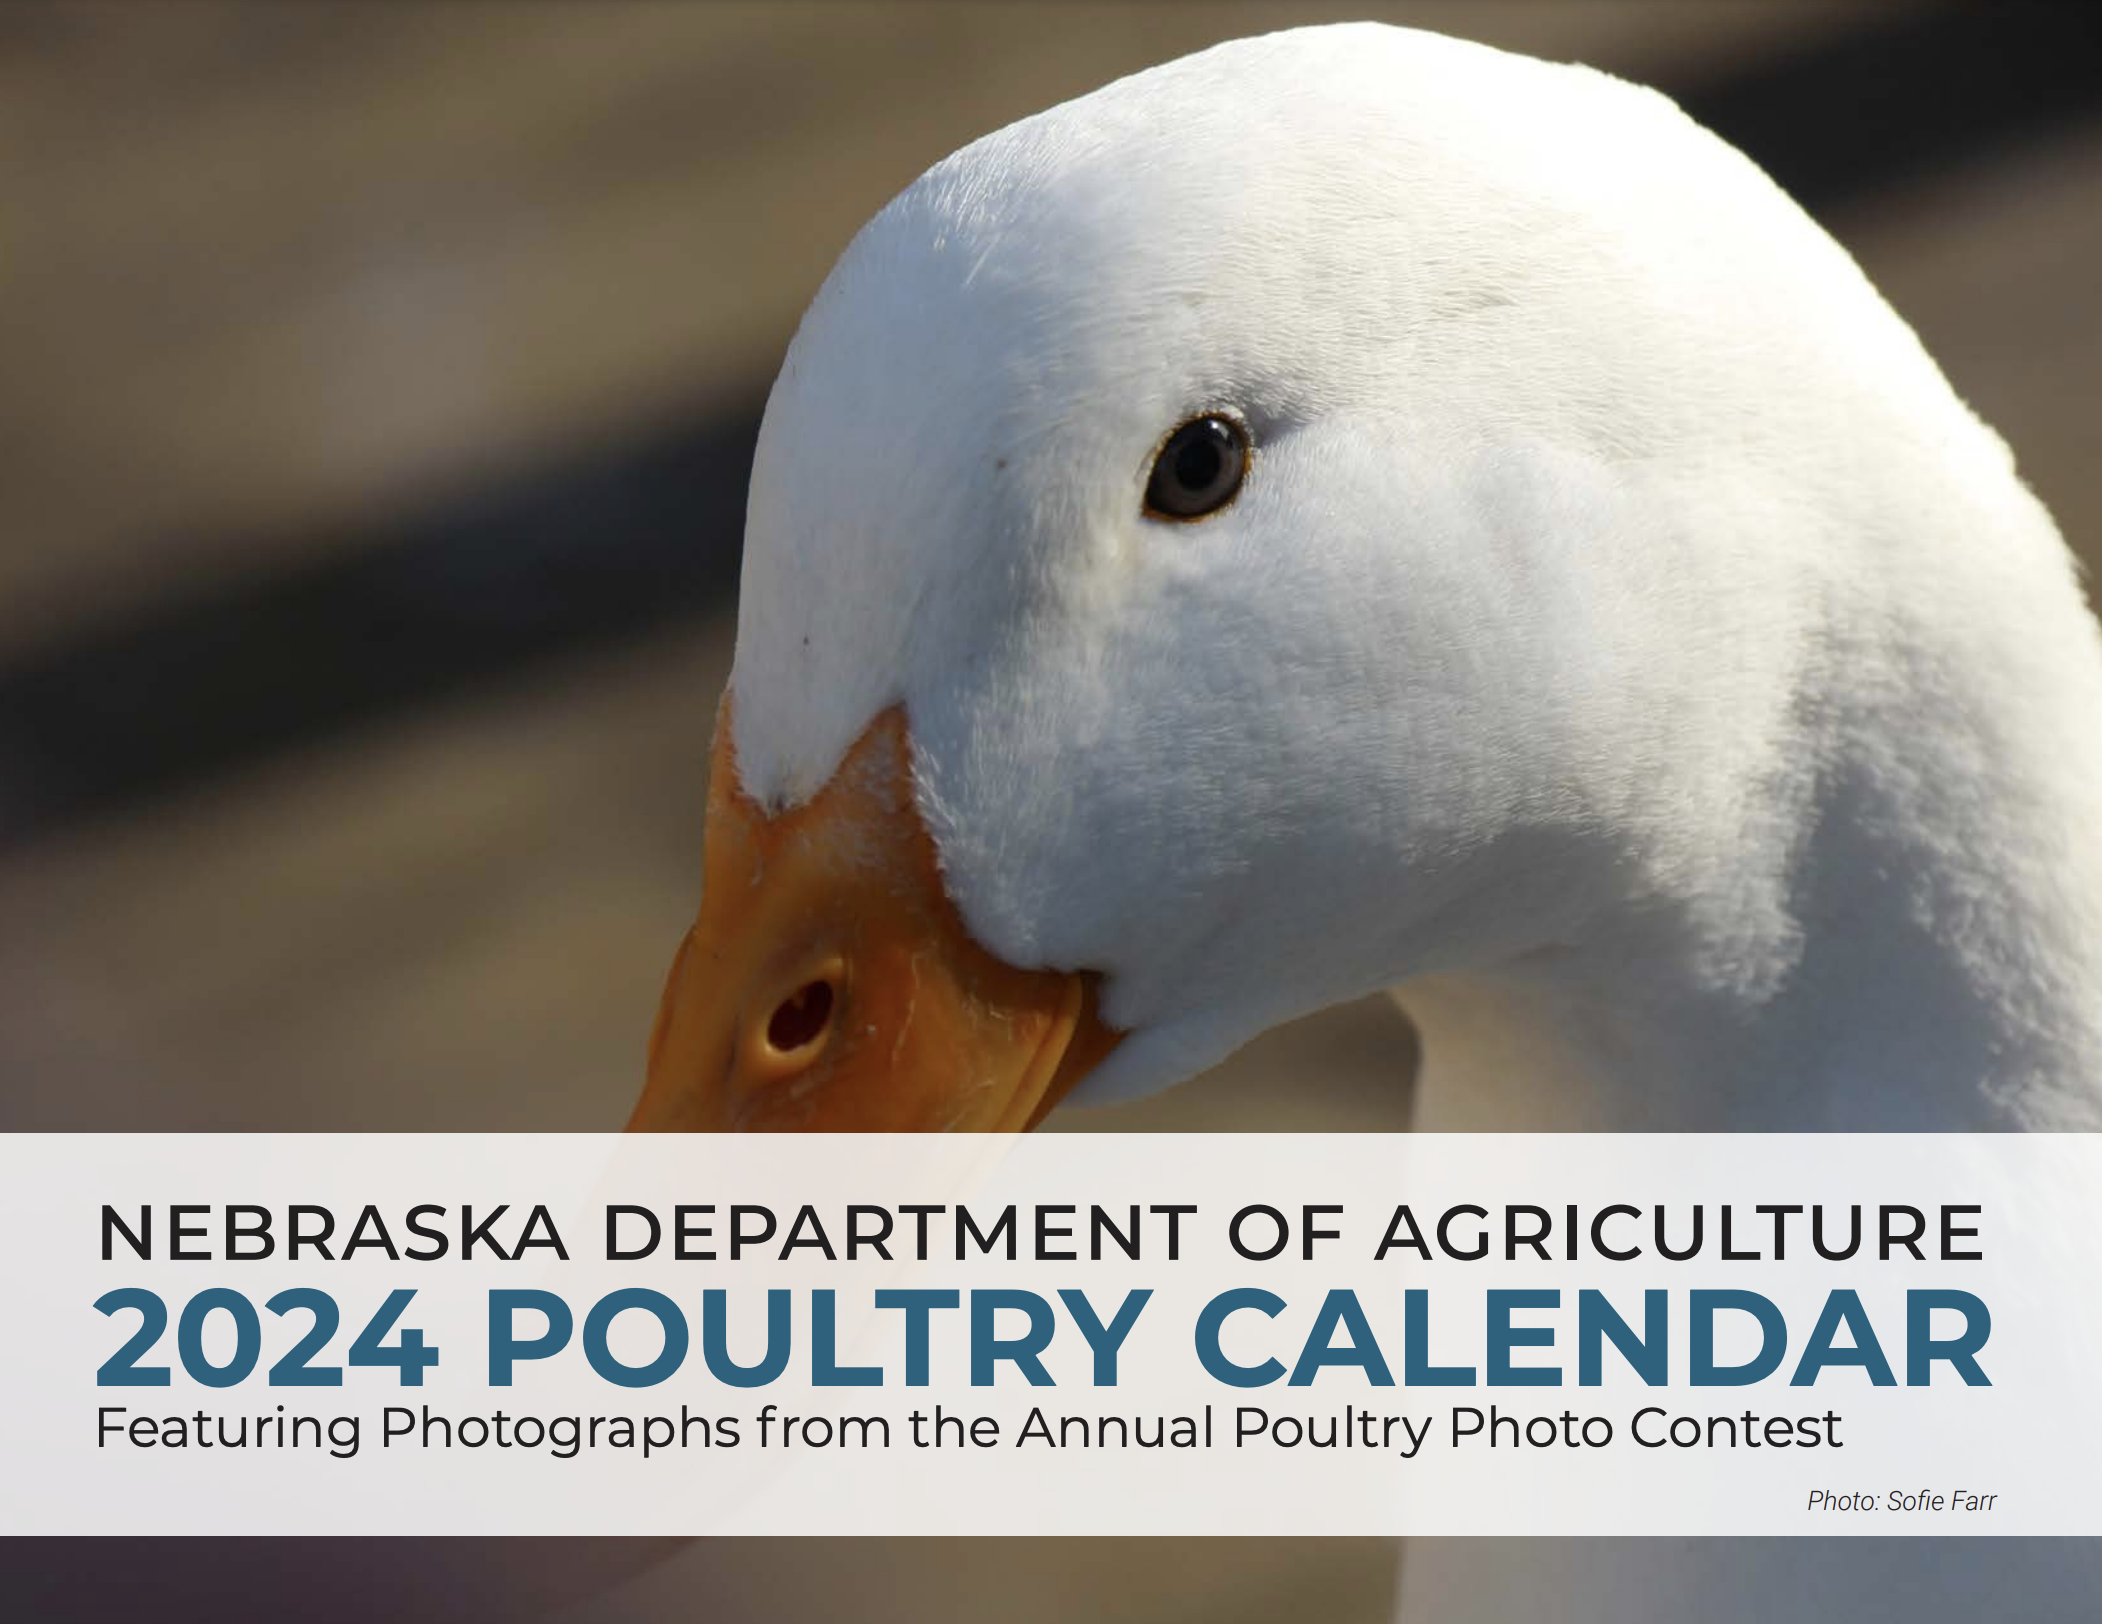 (Duck photo by Sofie Farr and calendar cover courtesy of Nebraska Department of Agriculture.)